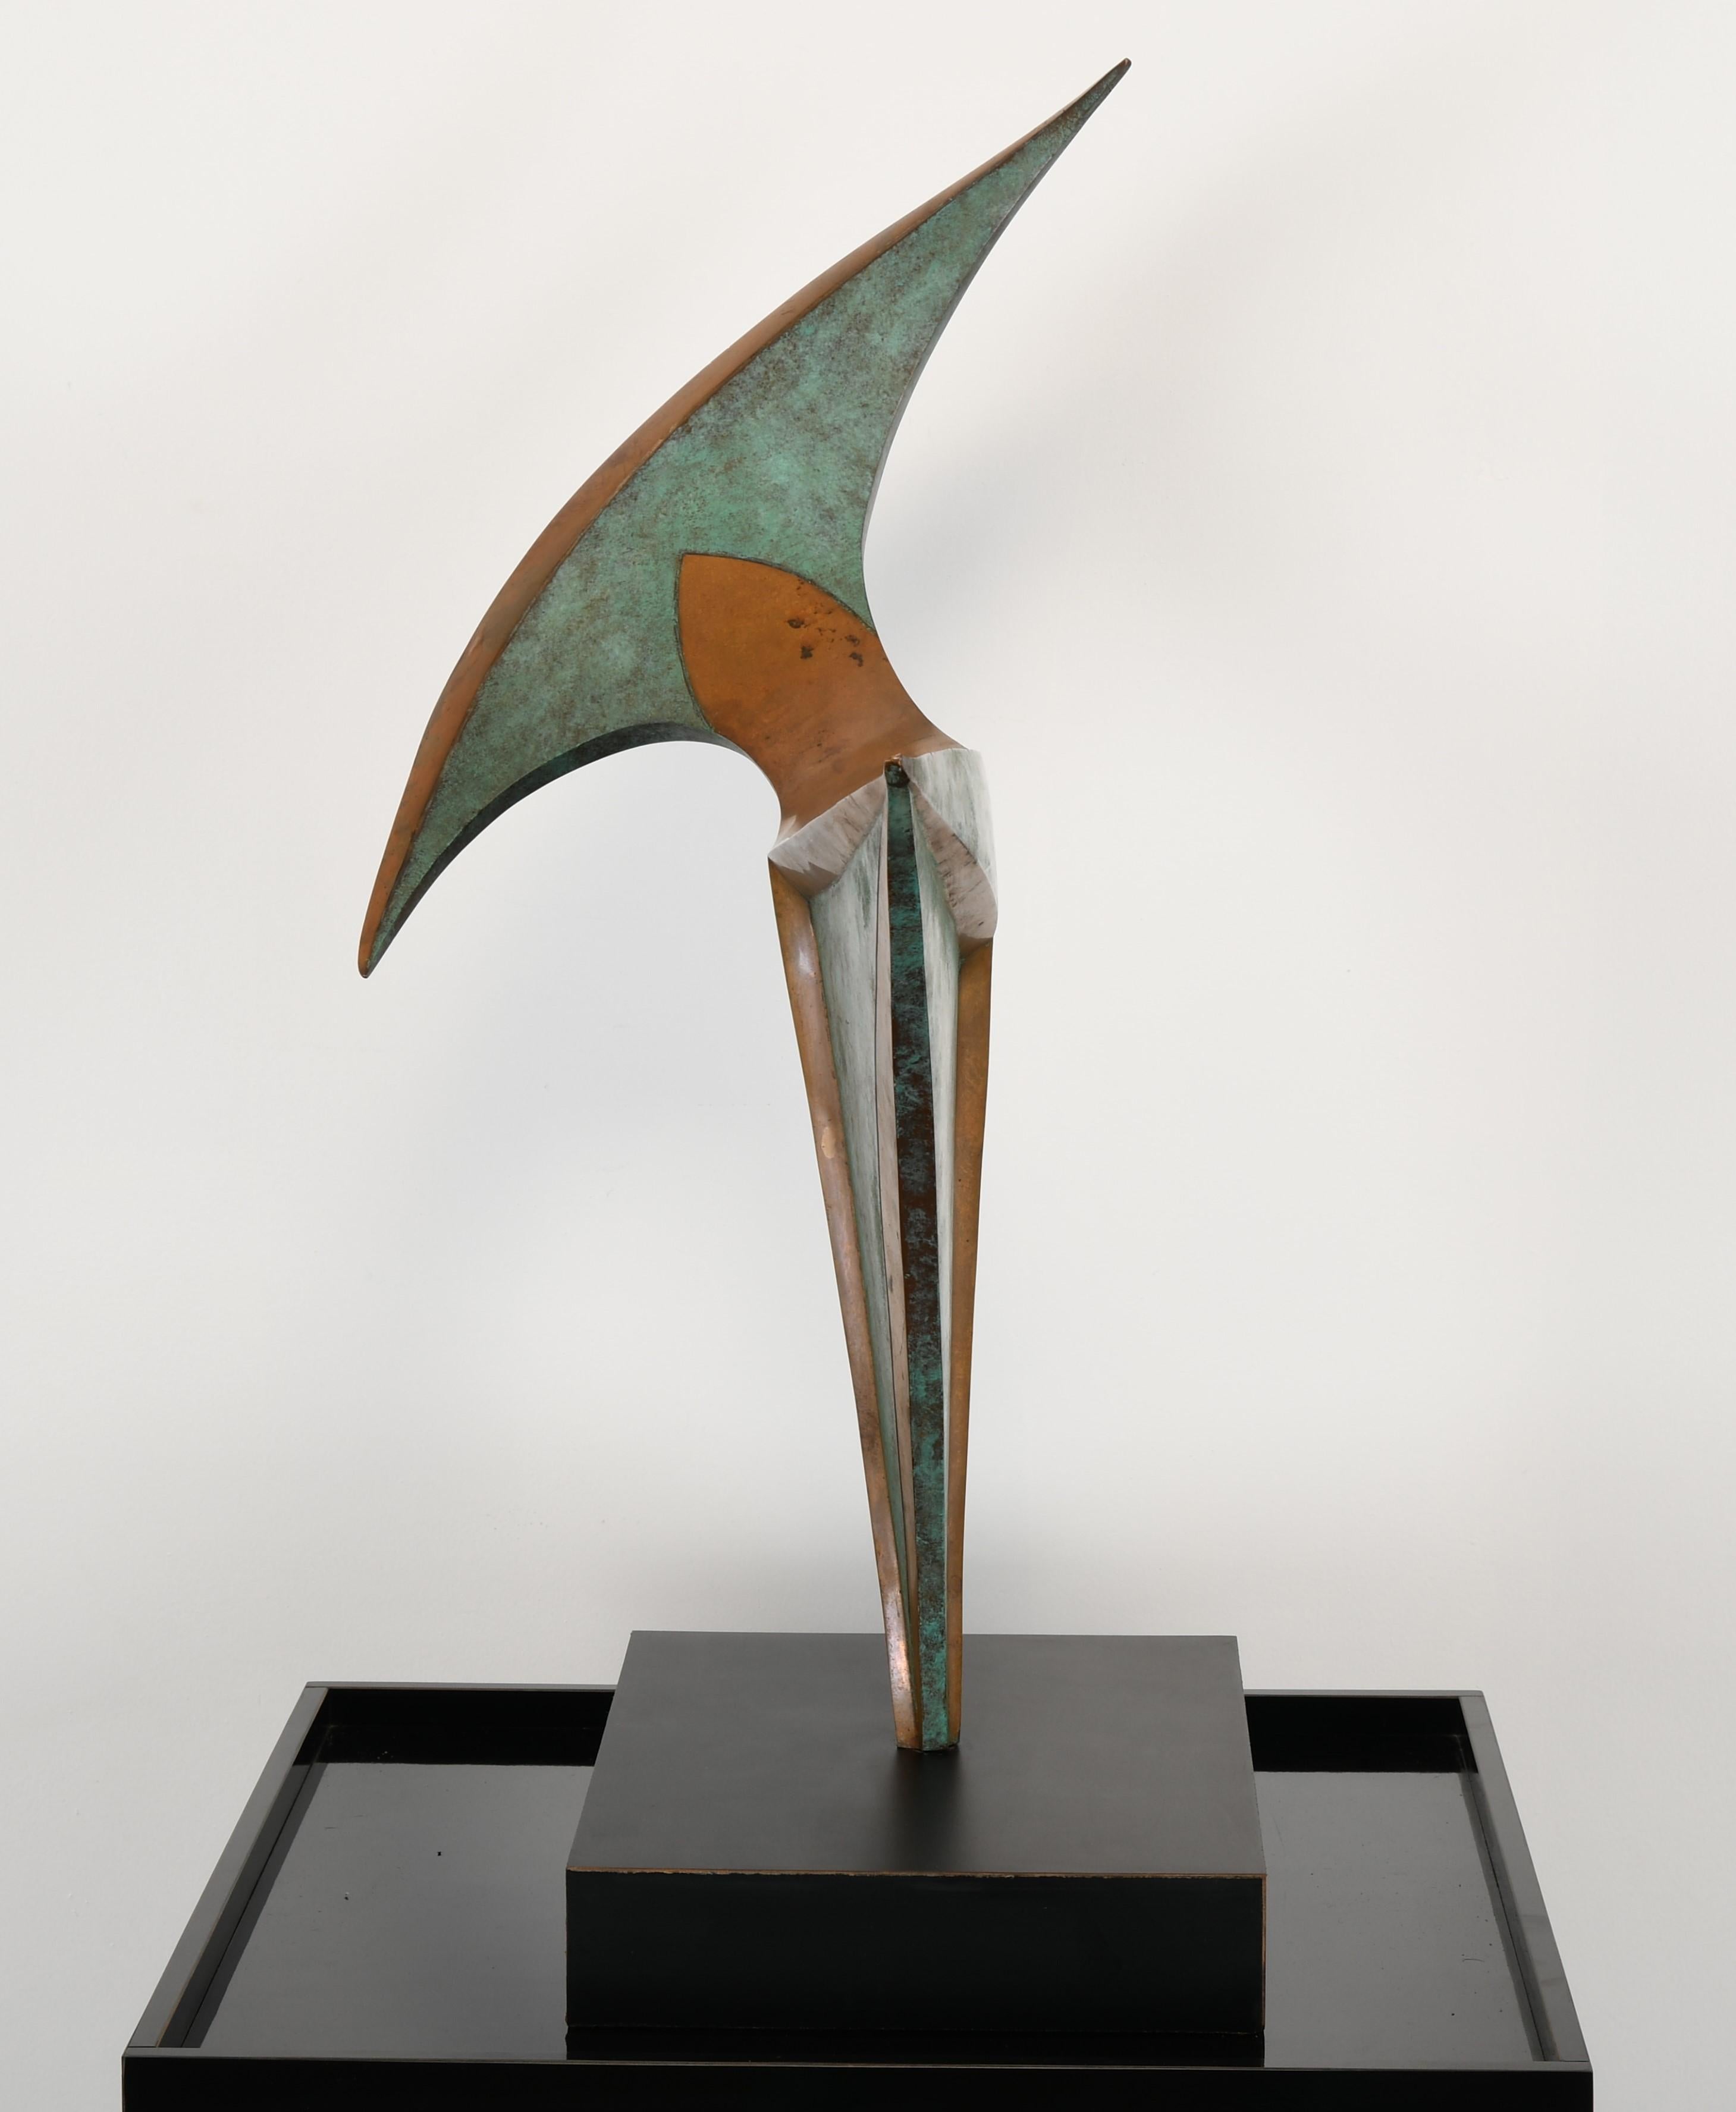 A large modernist bronze sculpture by Michi Raphael, American. Raphael's works are well exhibited and may be found in many private and public collections. This abstract piece is very dramatic with alternating patinated Verdigris bronze and natural